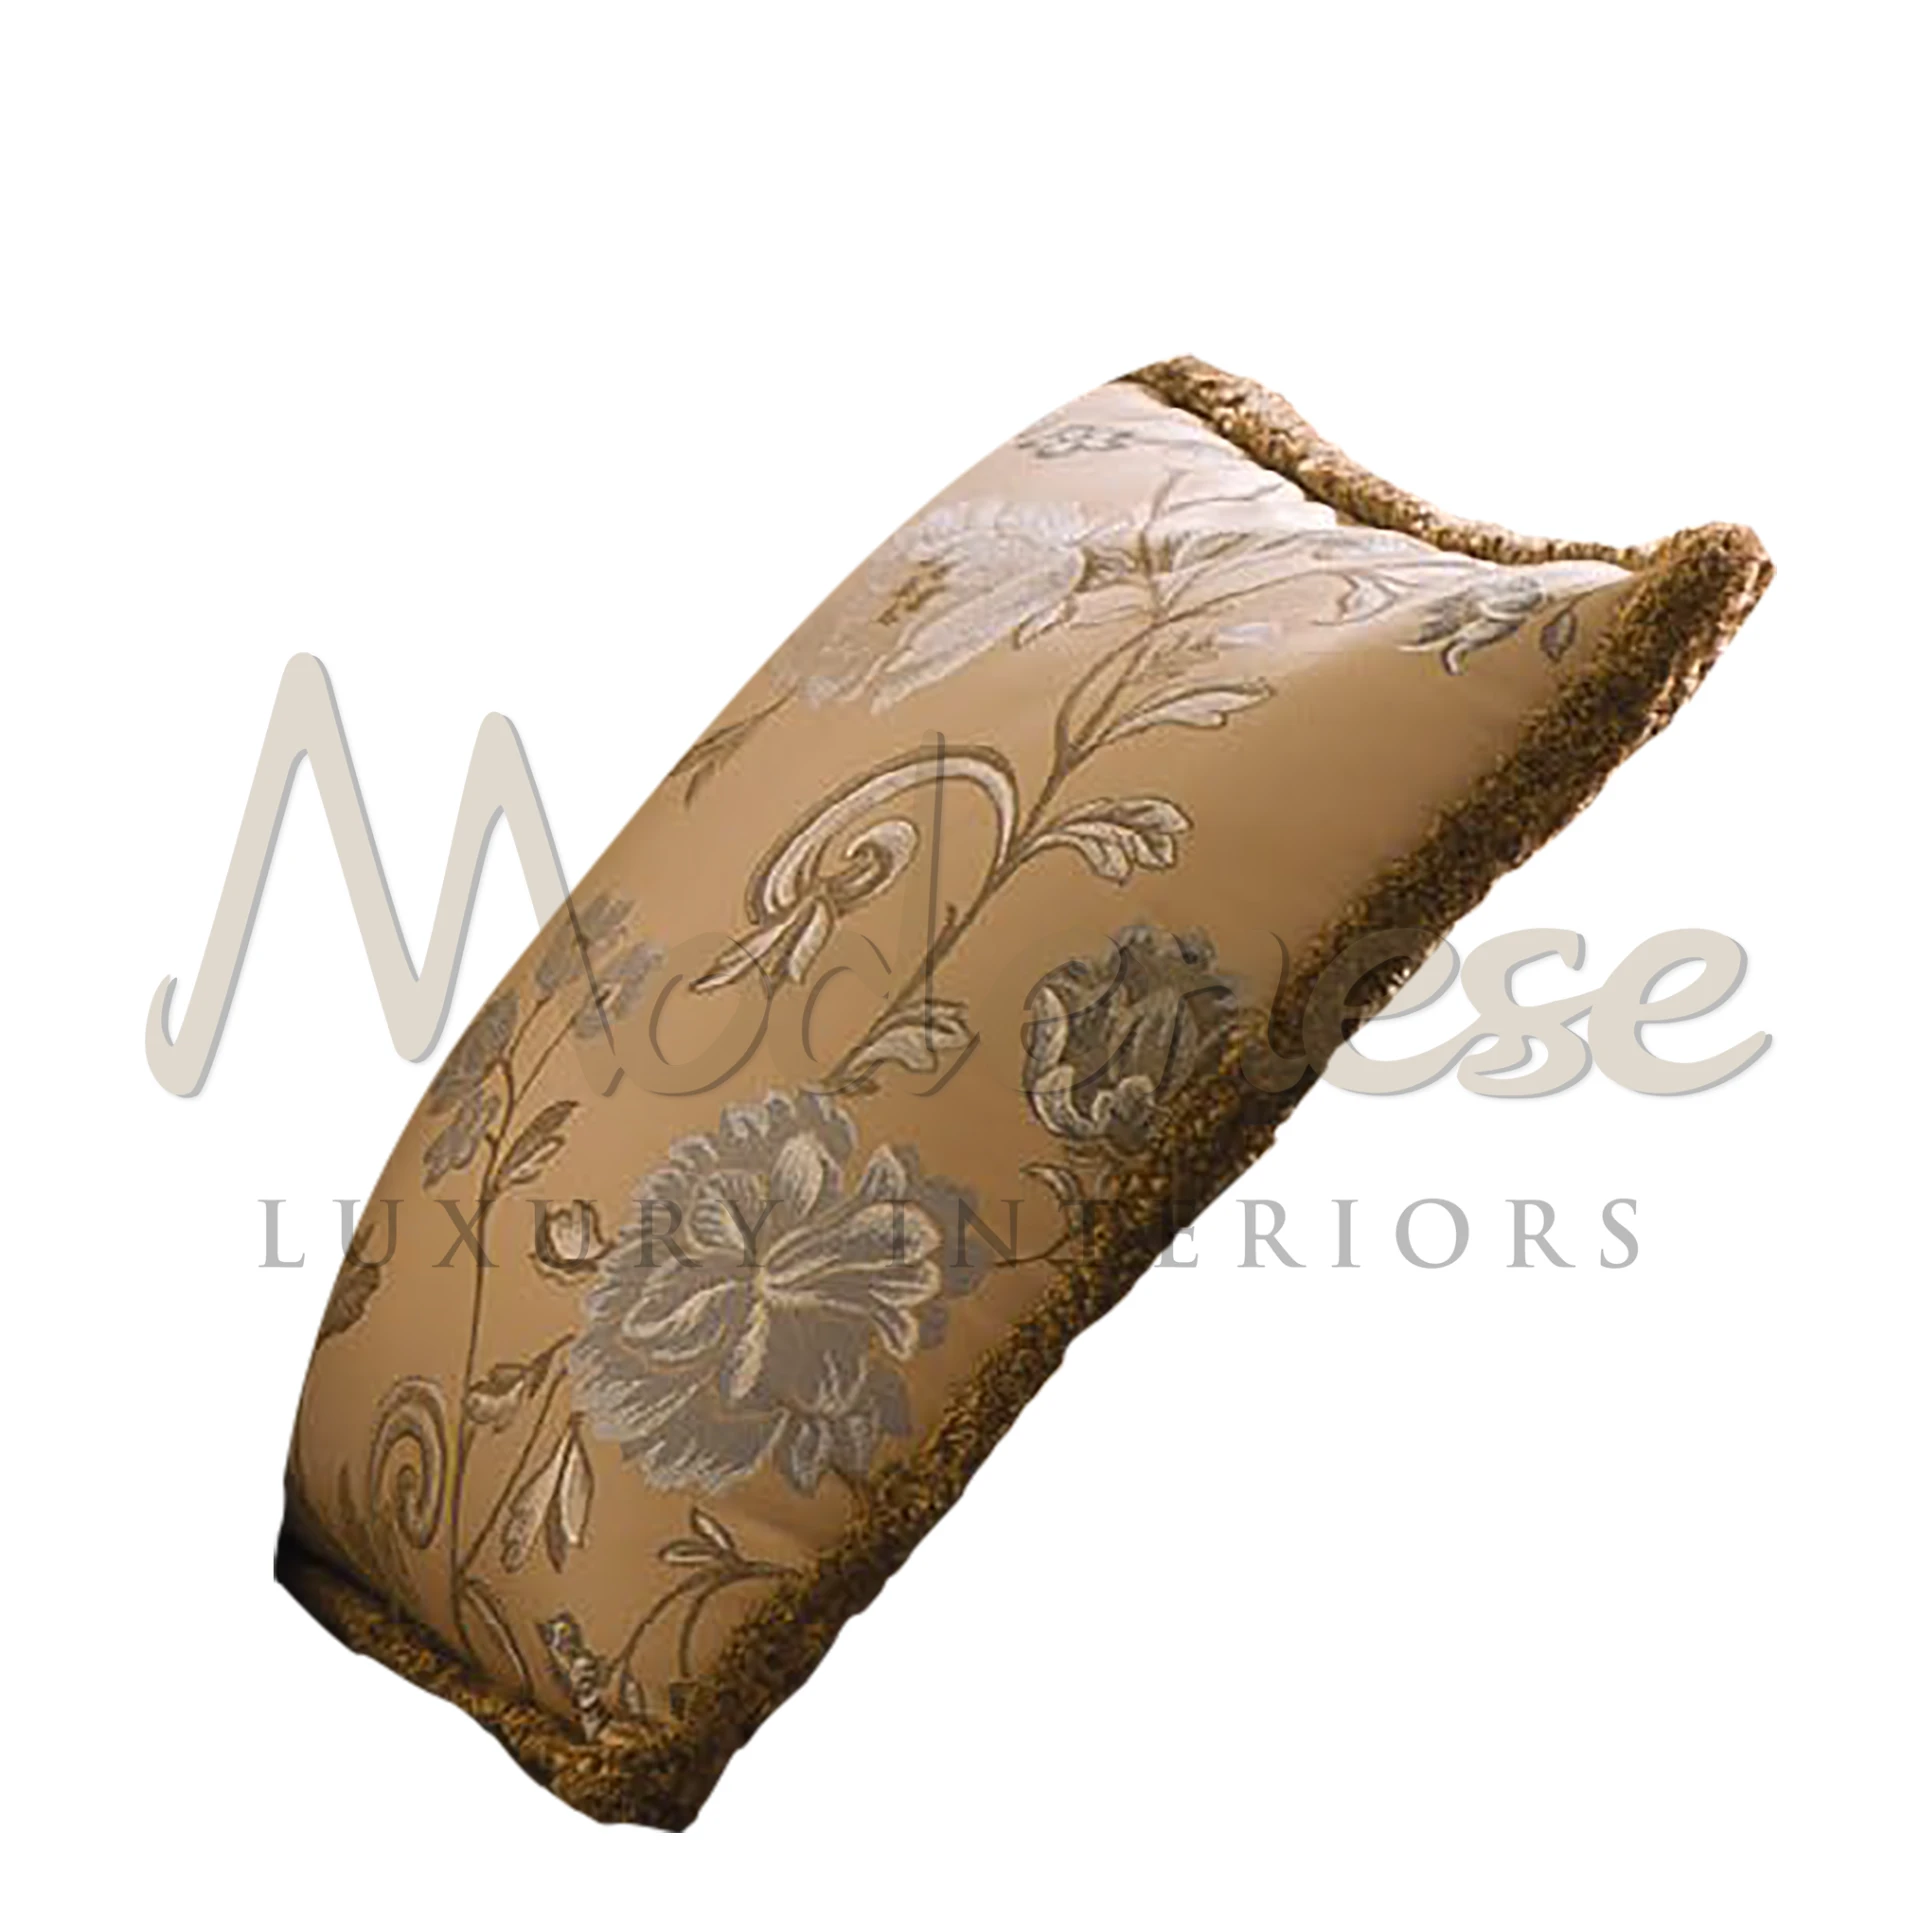 Victorian Beige Pillow with elaborate patterns and ornate details, showcasing the lavish style of Italian luxury textiles.